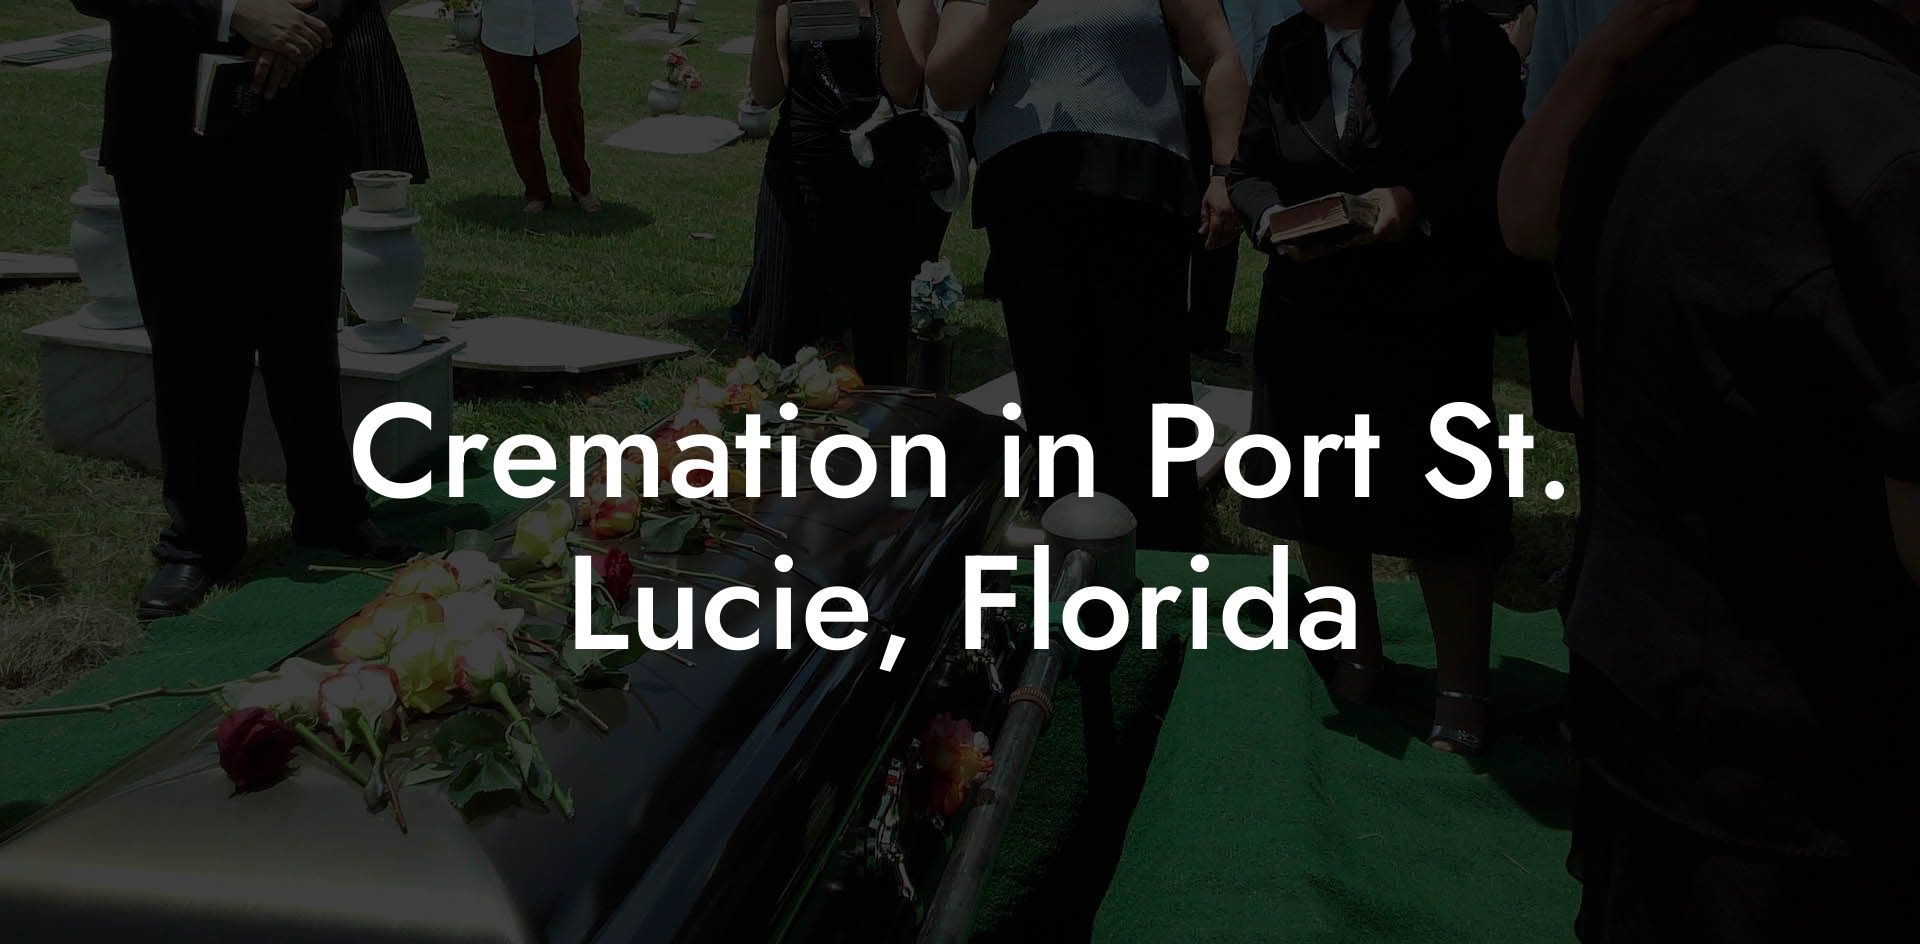 Cremation in Port St. Lucie, Florida